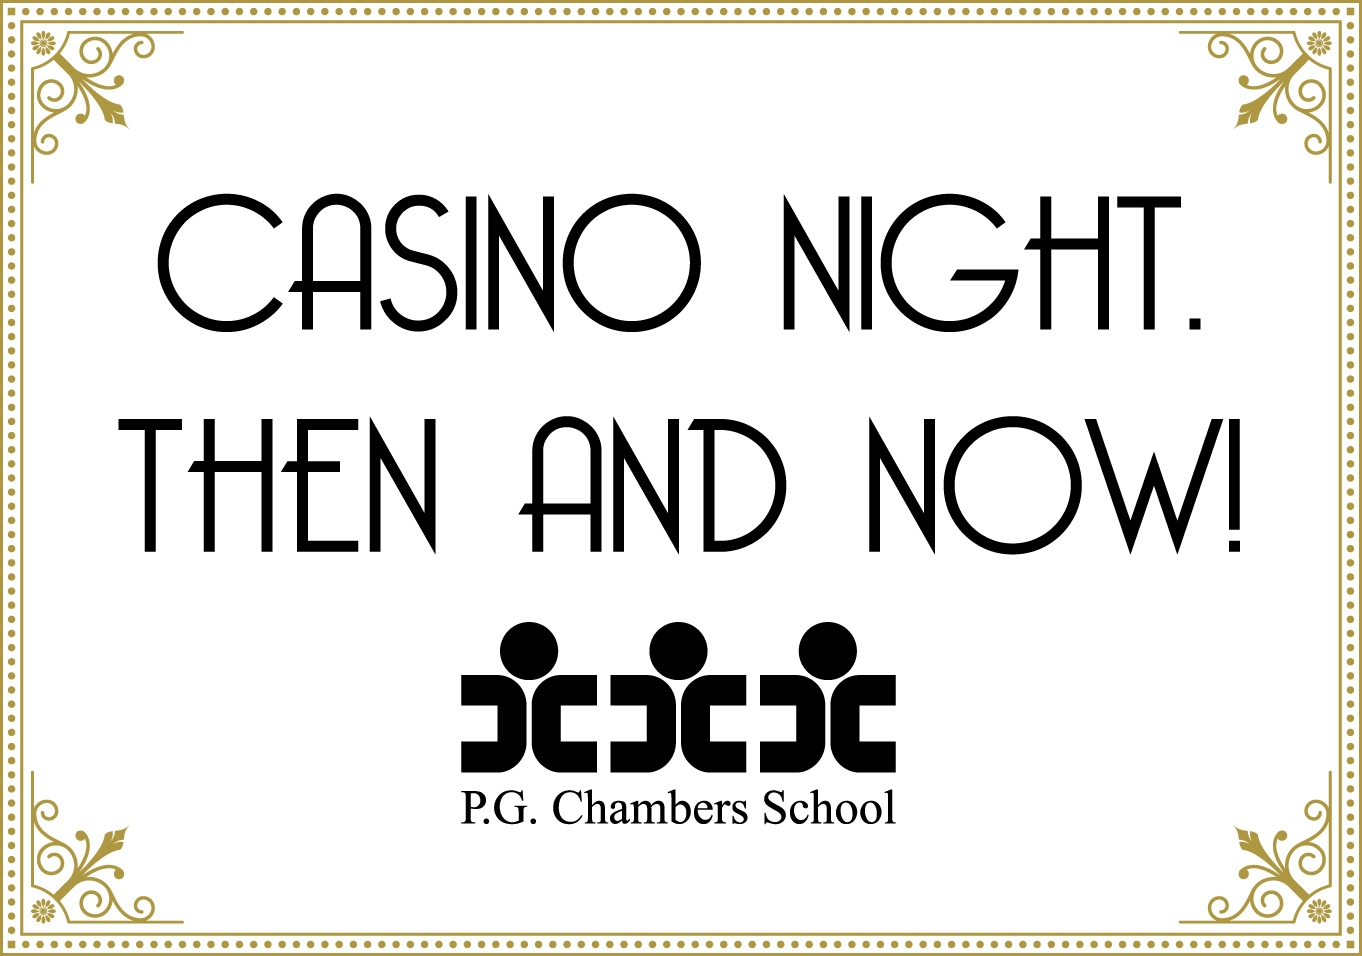 Casino Night. Then and Now